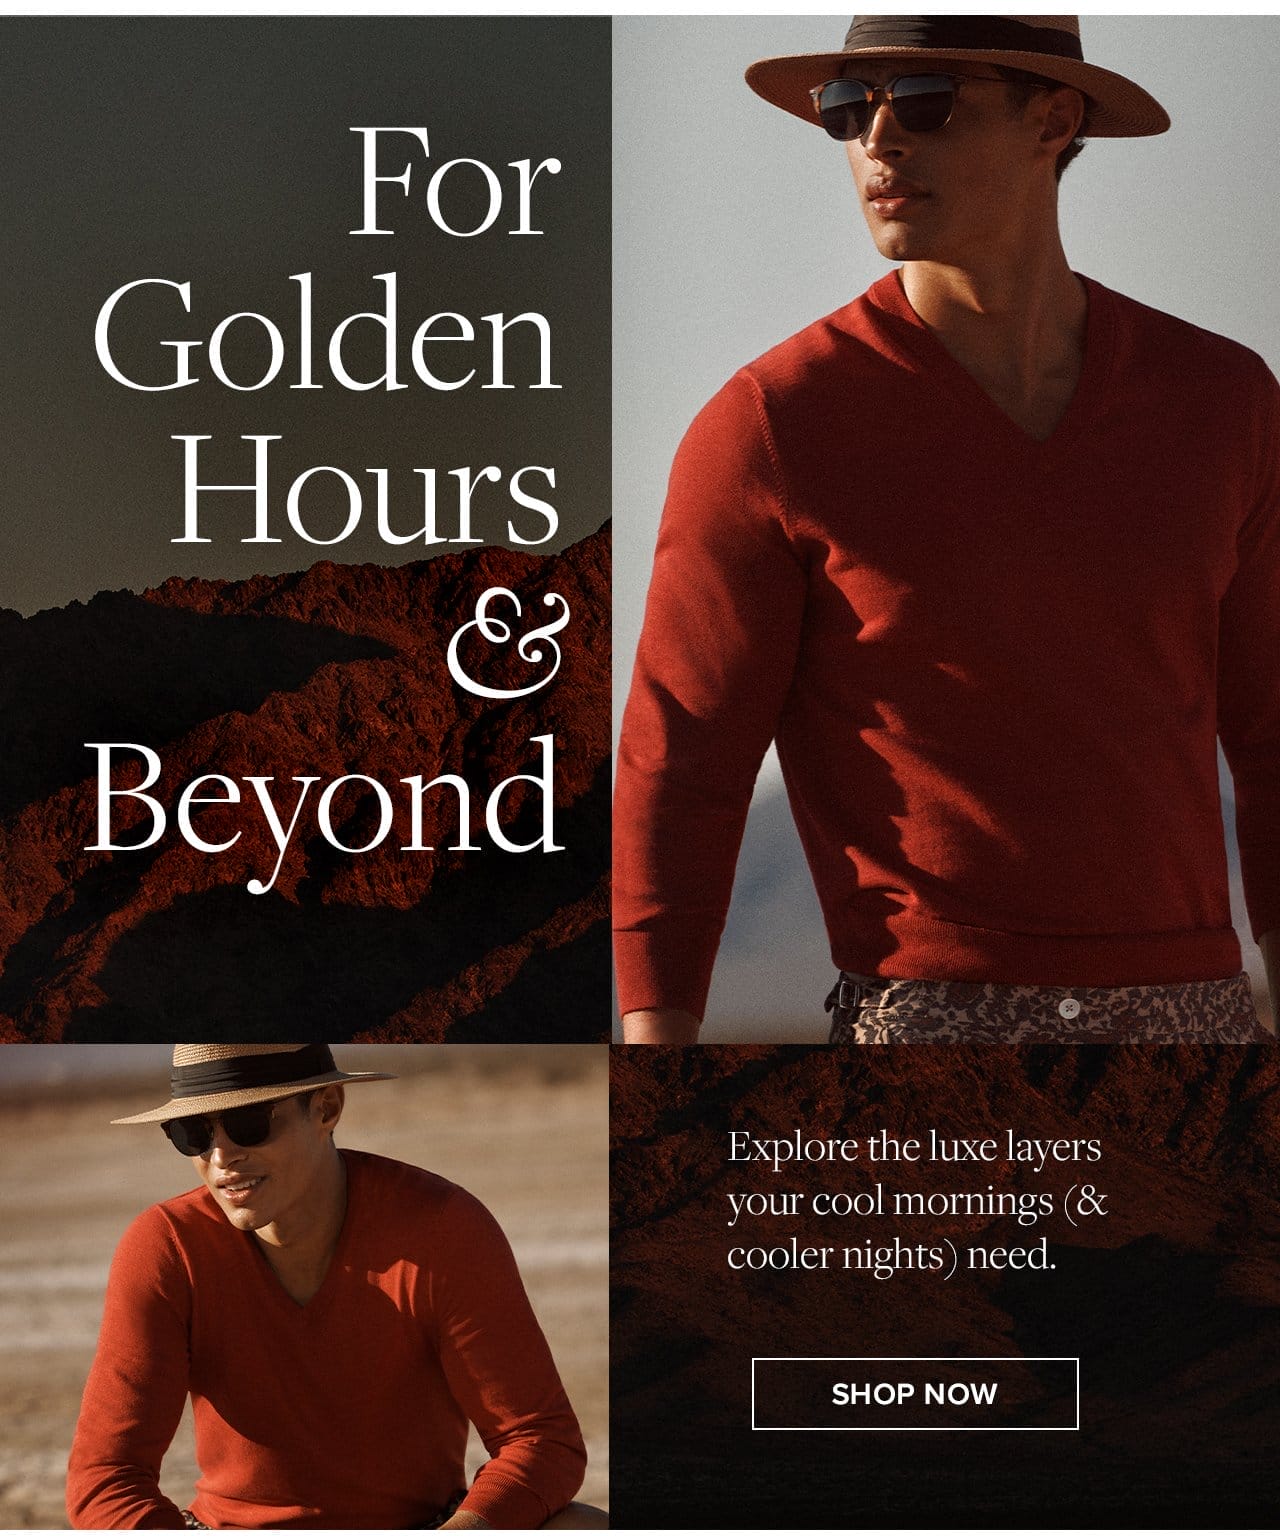 For Golden Hours and Beyond Explore the luxe layers your cool mornings and cooler nights need. Shop Now